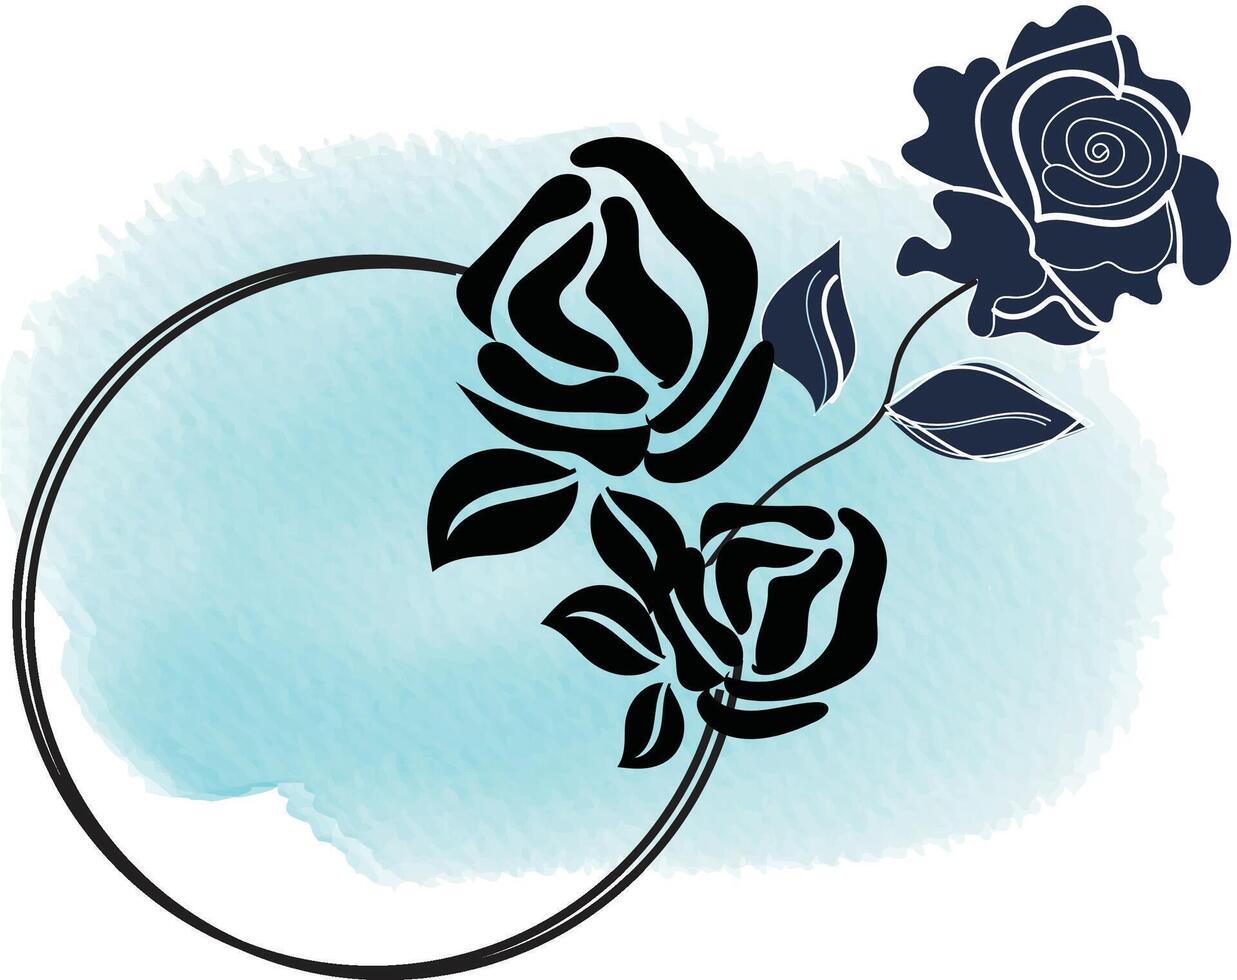 realistic hand drawn flowers with blank banner vector